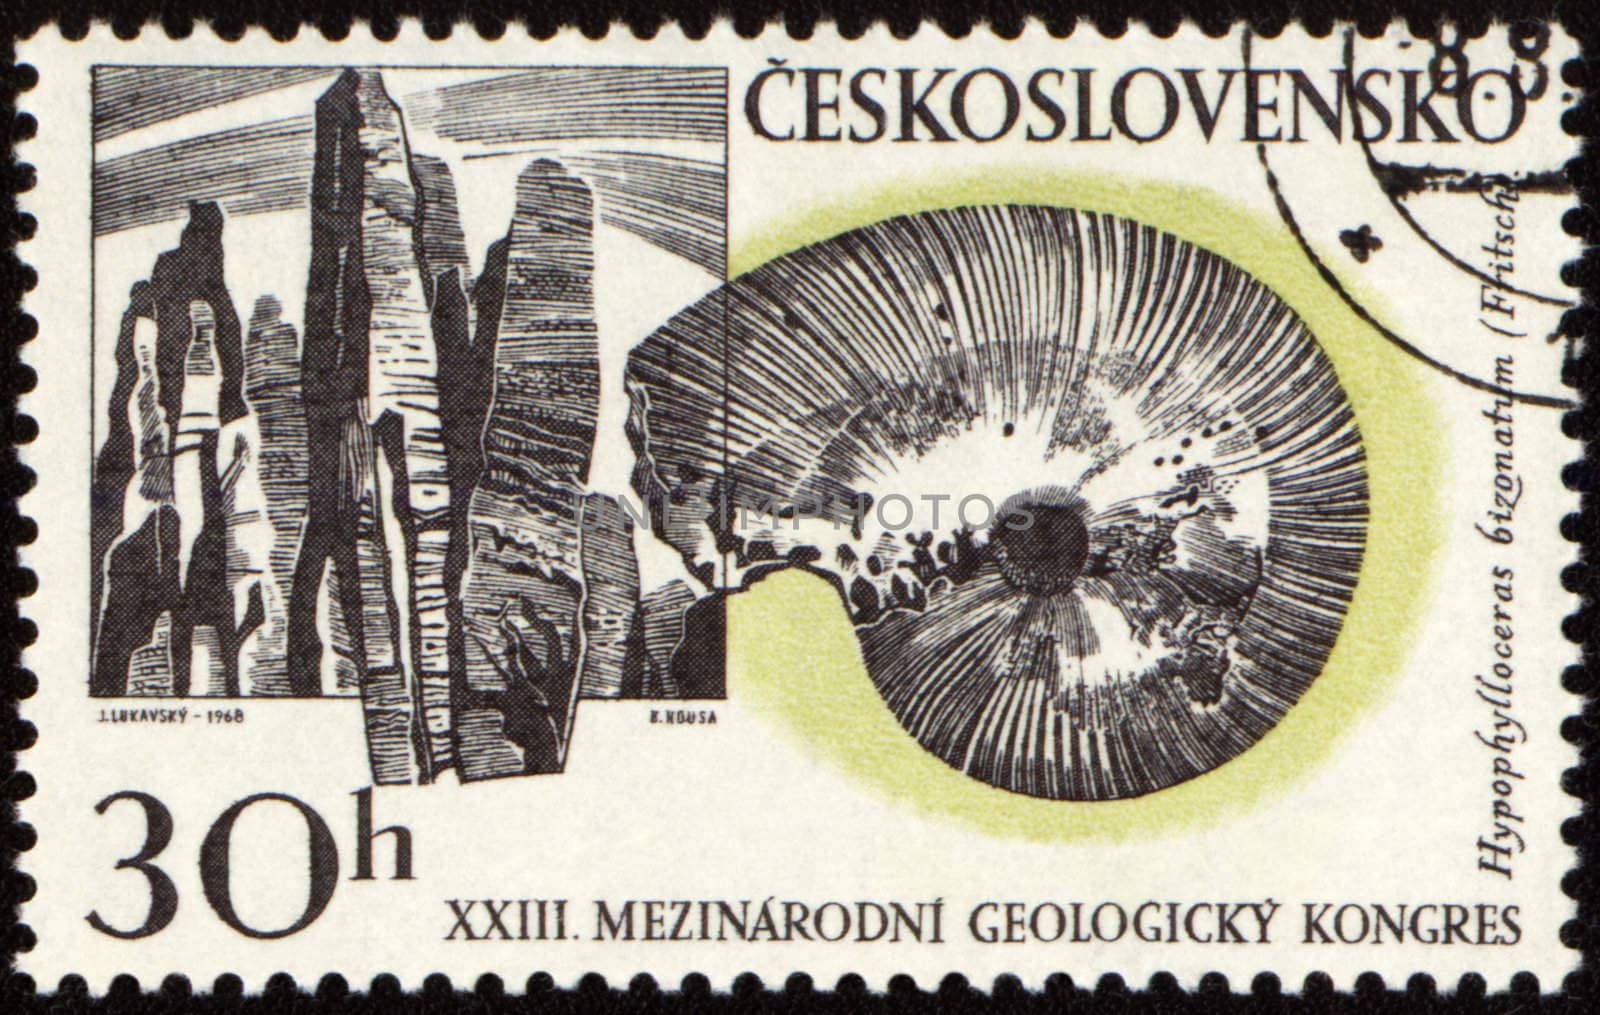 CZECHOSLOVAKIA - CIRCA 1968: A stamp printed in Czechoslovakia, shows rocks and fossil, devoted to the 23 International Geological Congress, circa 1968